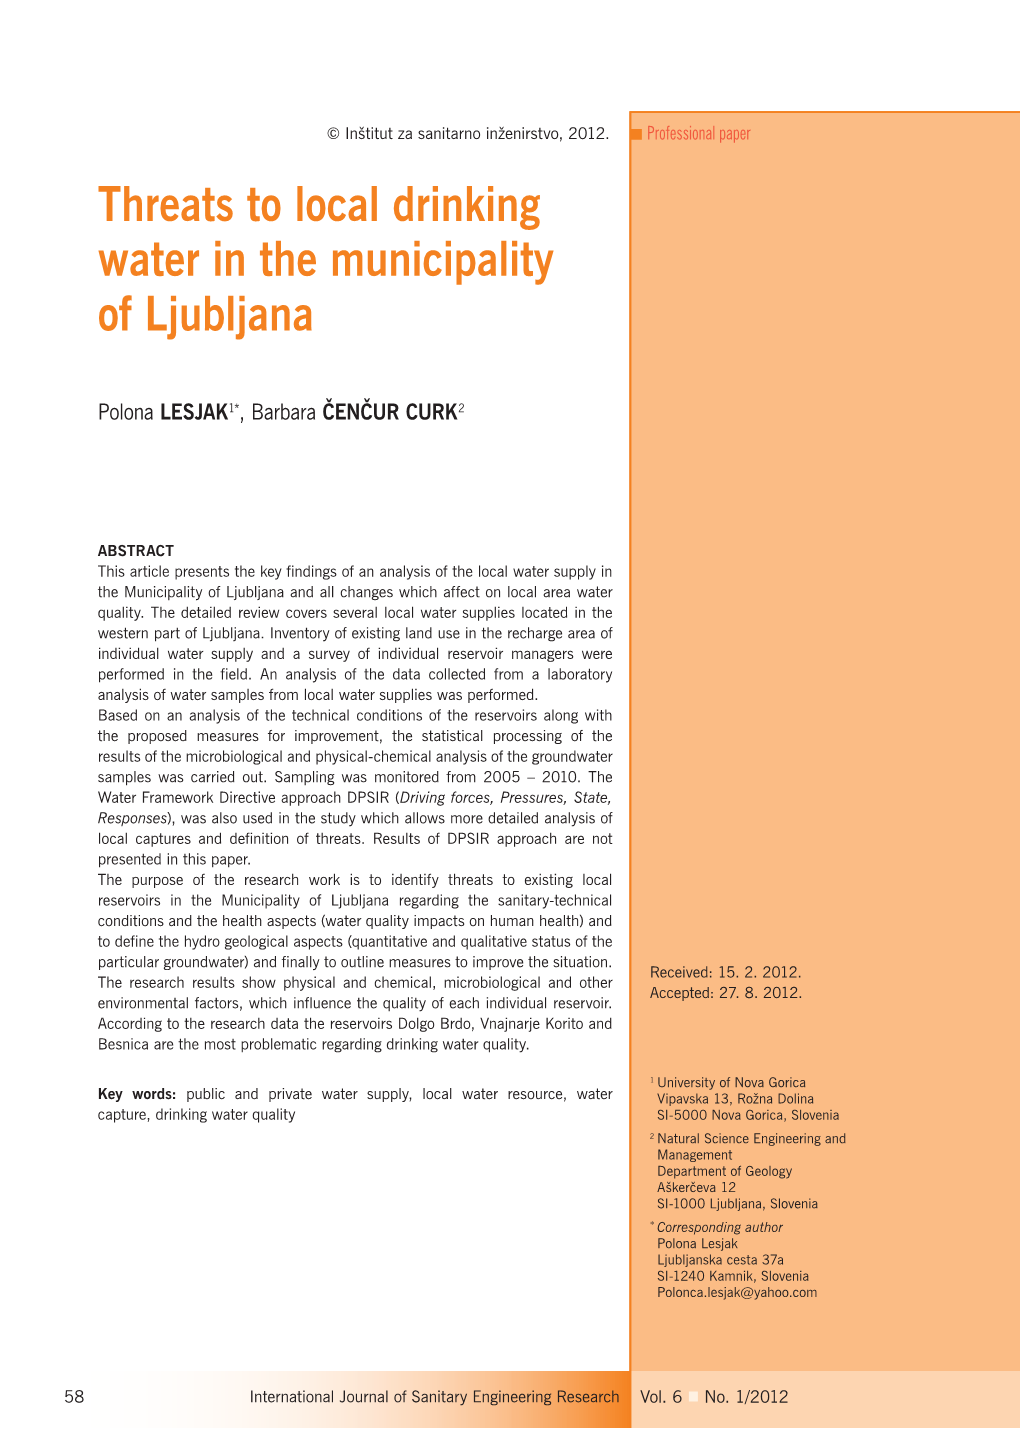 Threats to Local Drinking Water in the Municipality of Ljubljana